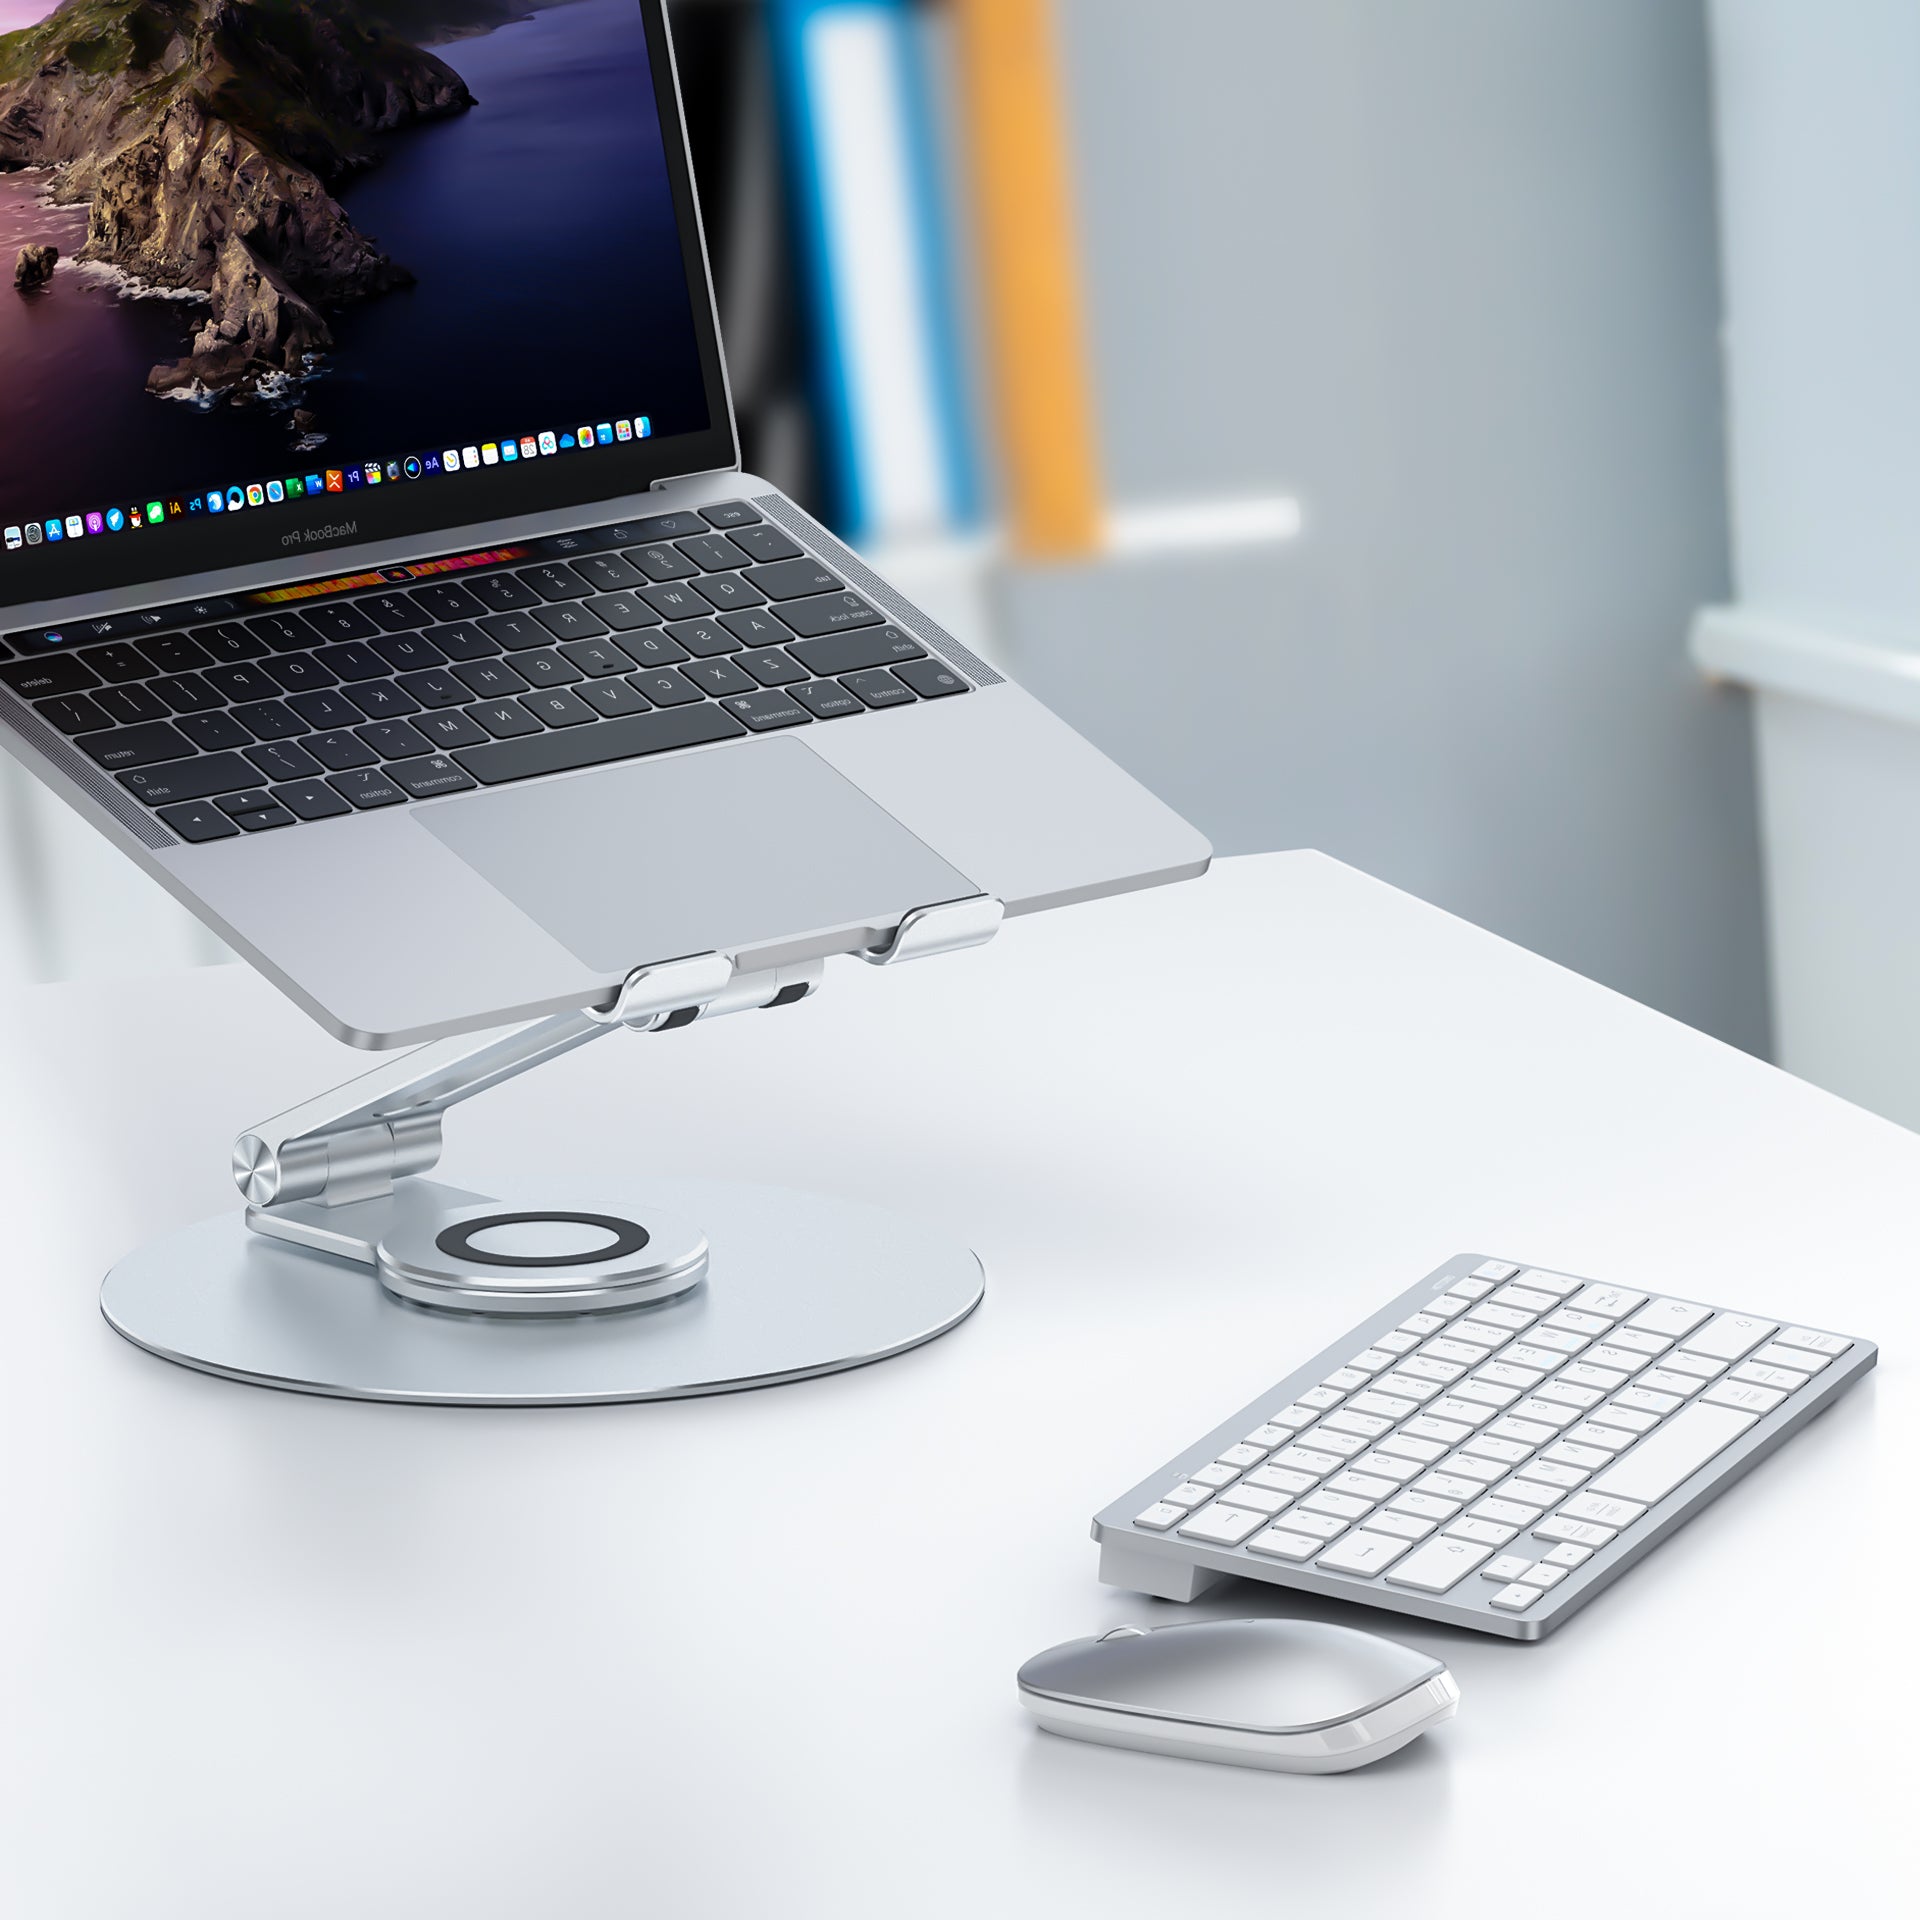 10 Top-Rated Laptop Stands to Save Your Neck